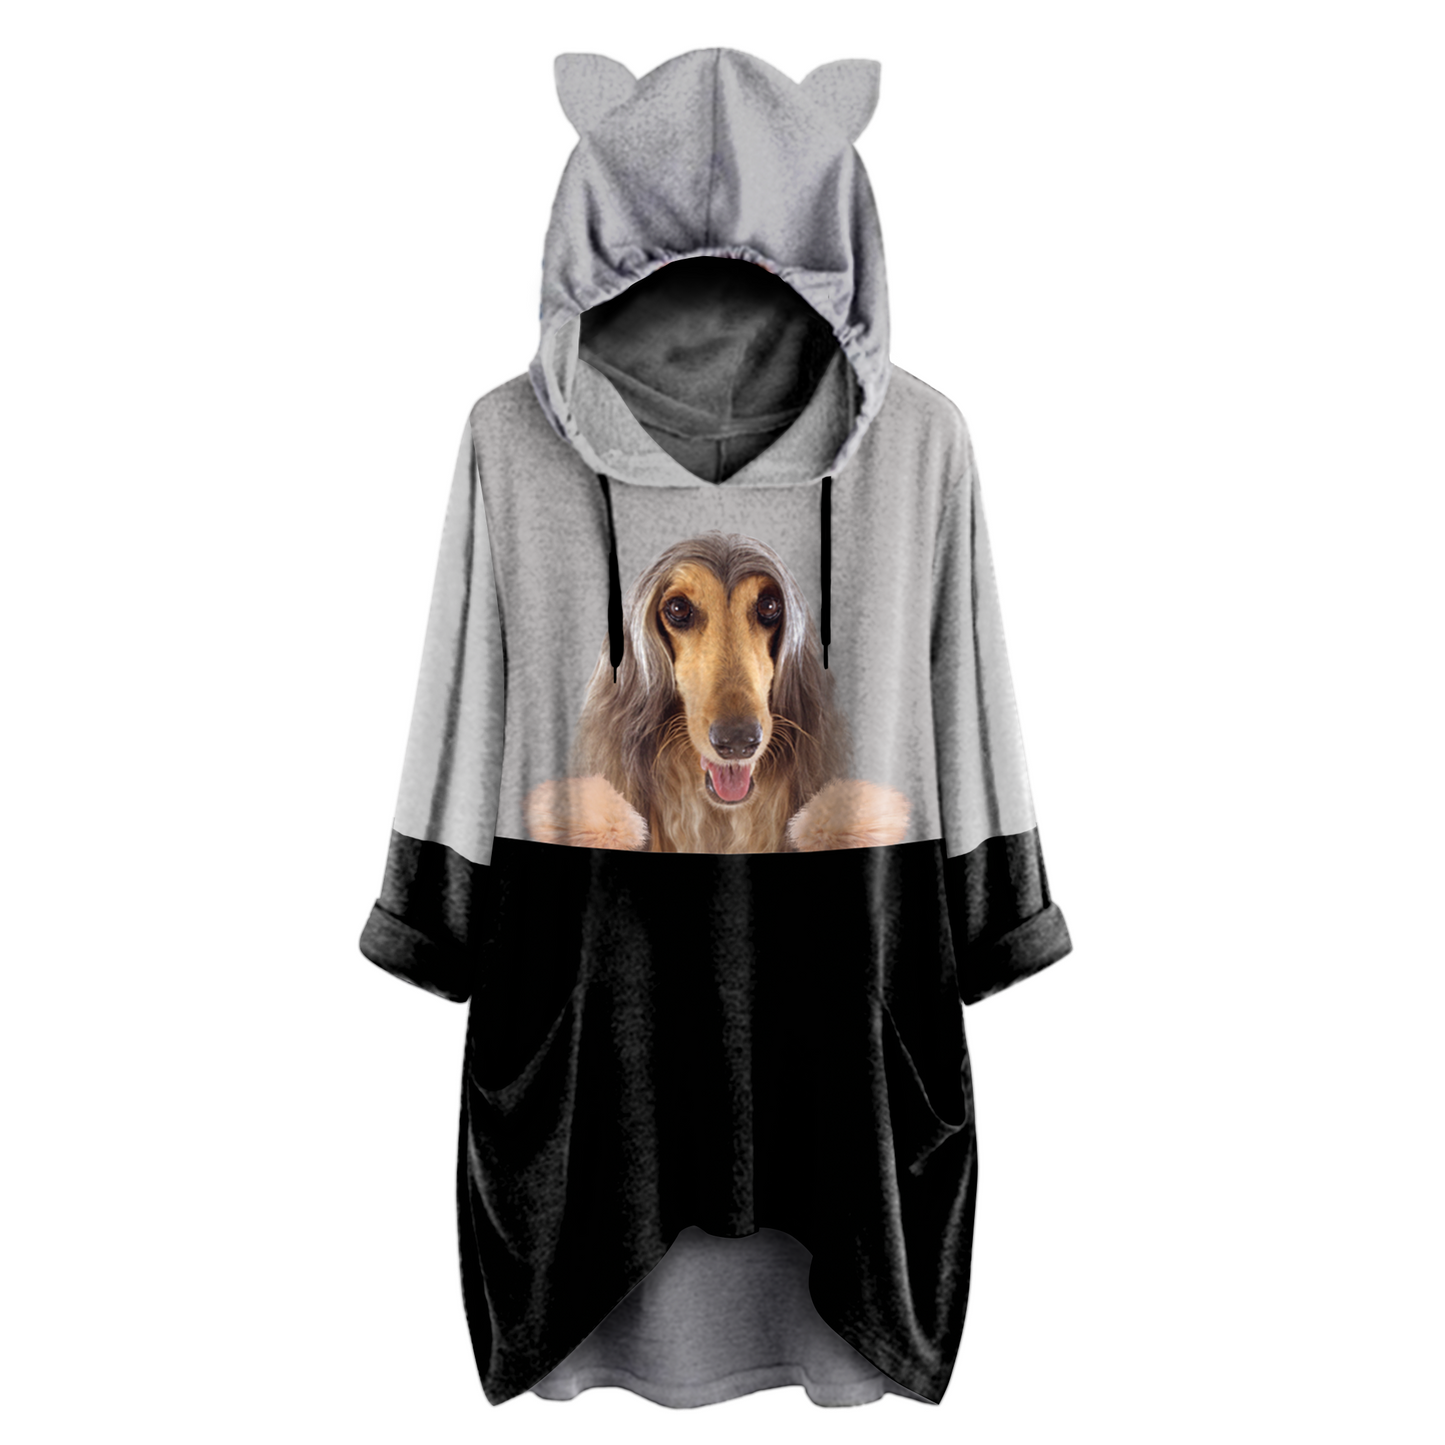 Can You See Me Now - Afghan Hound Hoodie With Ears V2